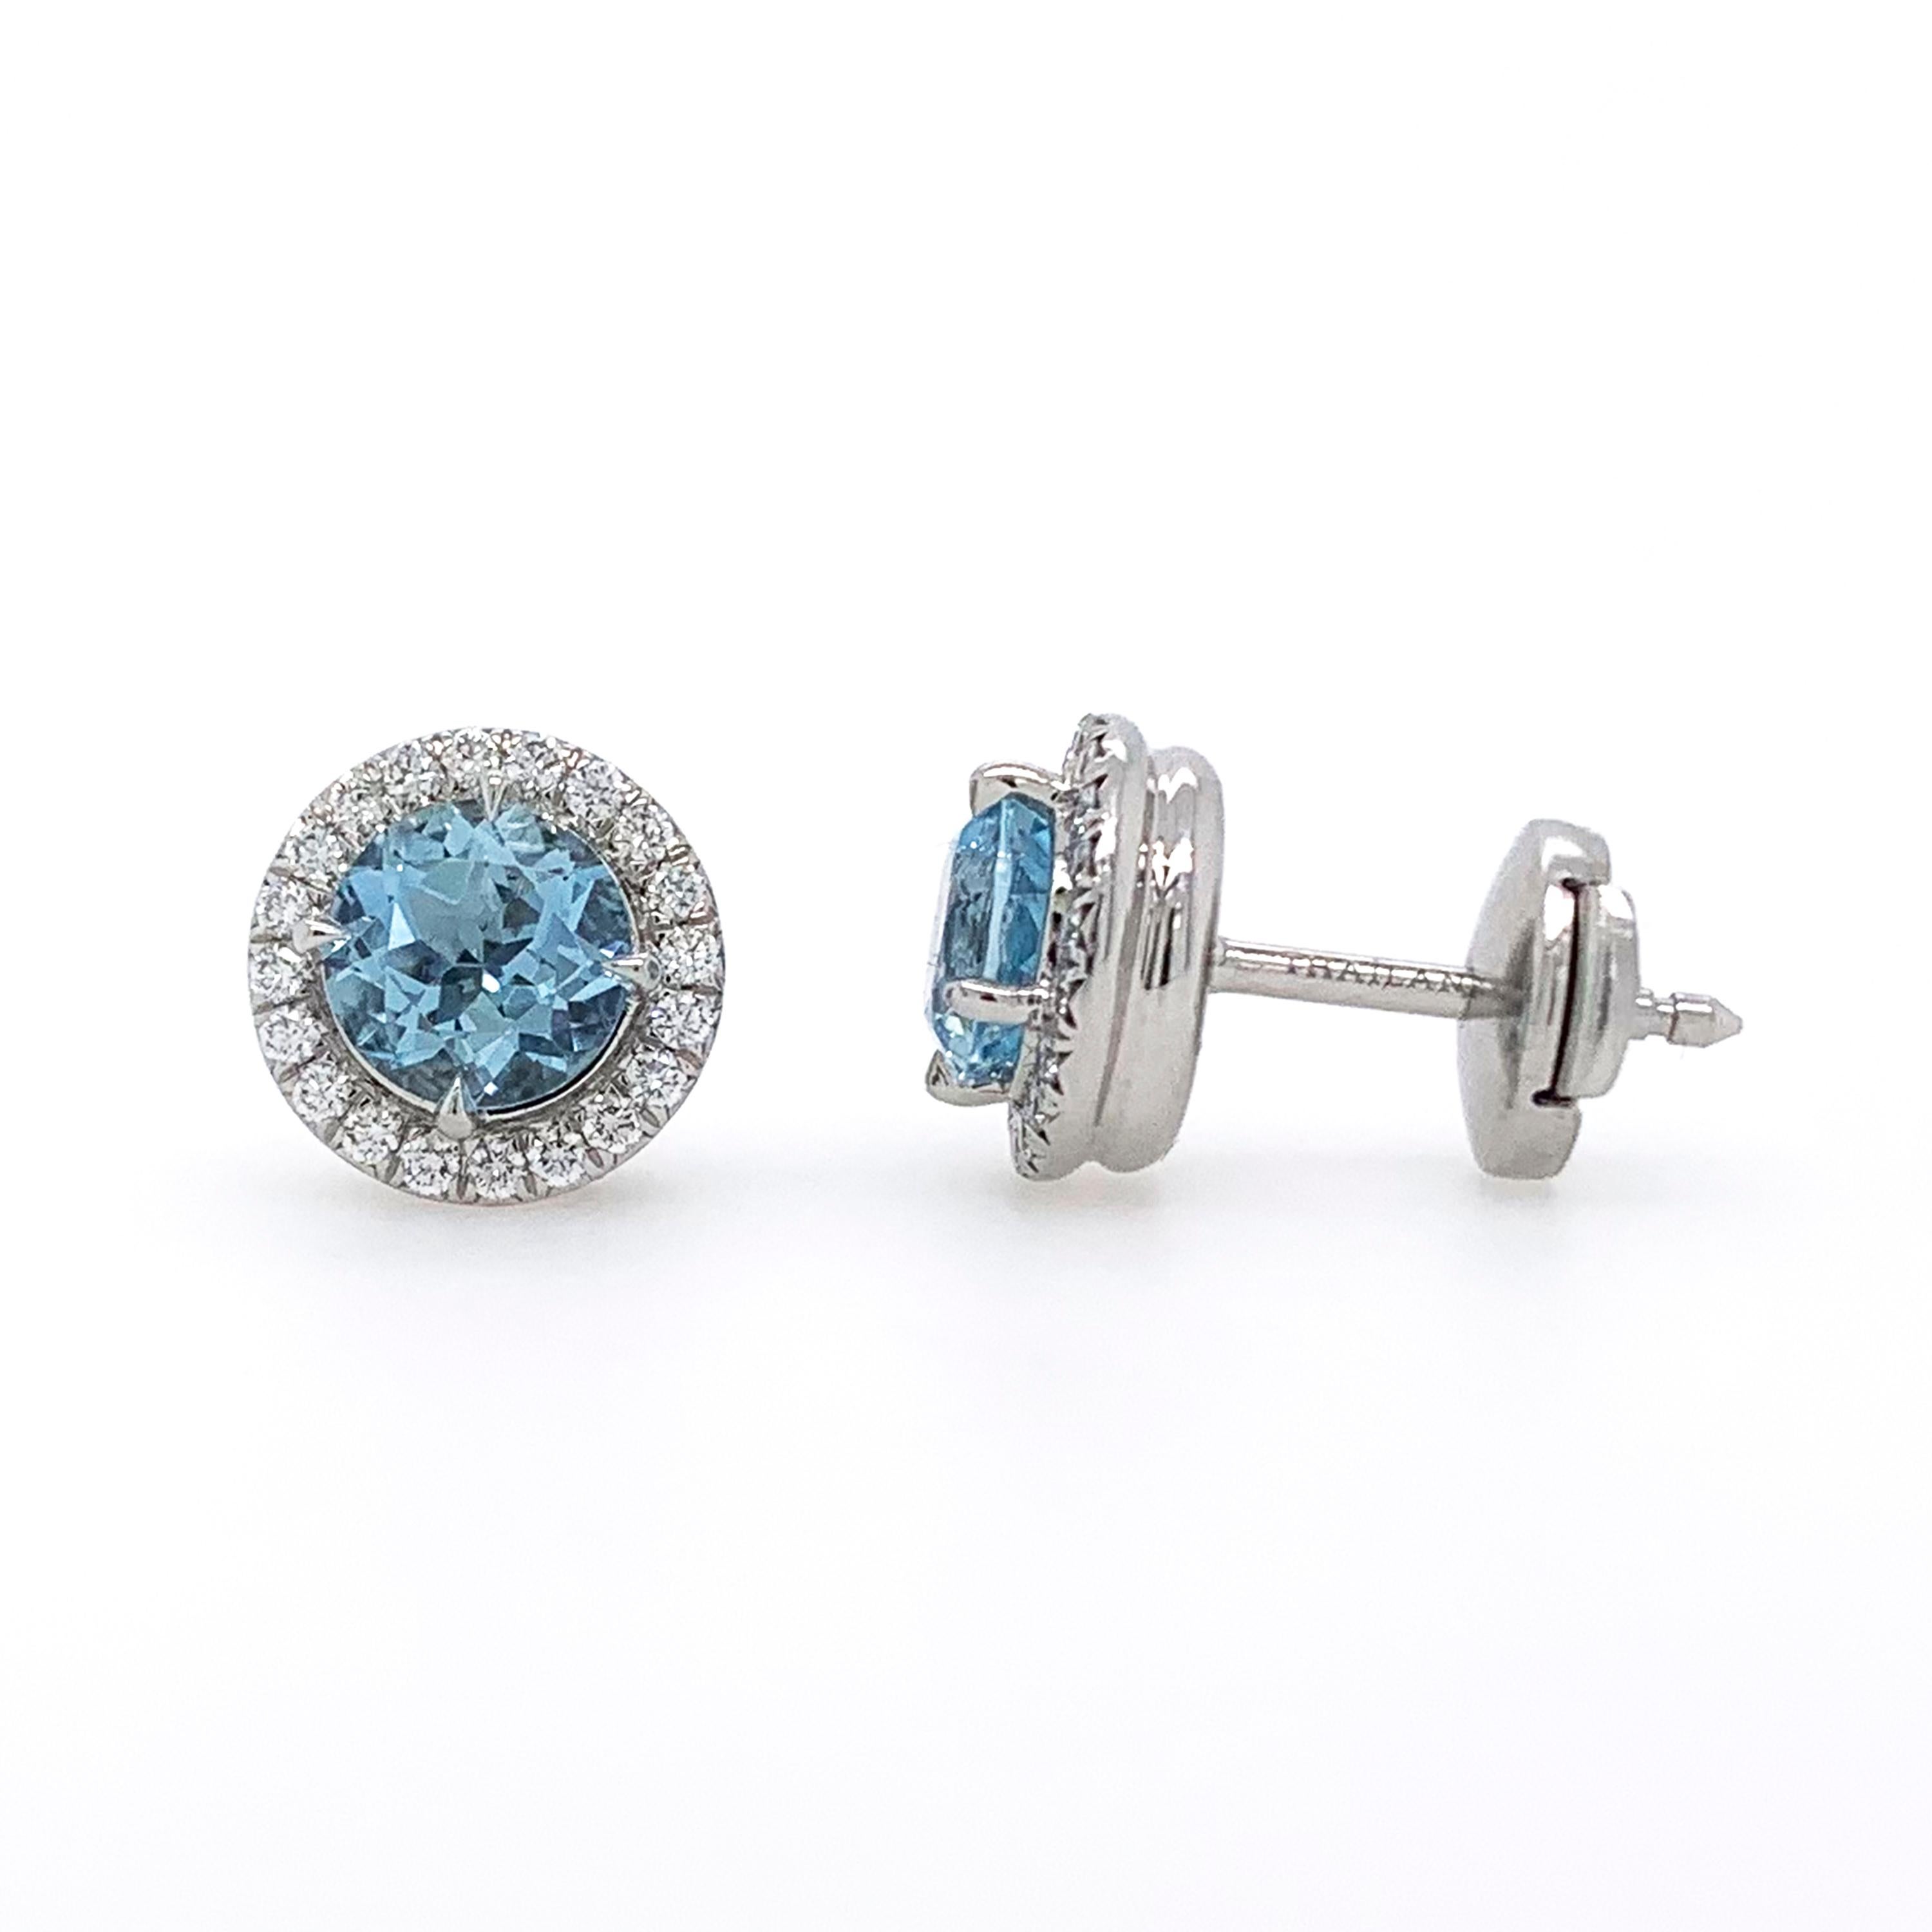 Tiffany & Company Soleste aquamarine and diamond halo style stud earrings in platinum.

This pair of earrings features two 6mm round brilliant cut aquamarines totaling approximately 1.50 carat, as well as approximately 0.20 carats of round brilliant